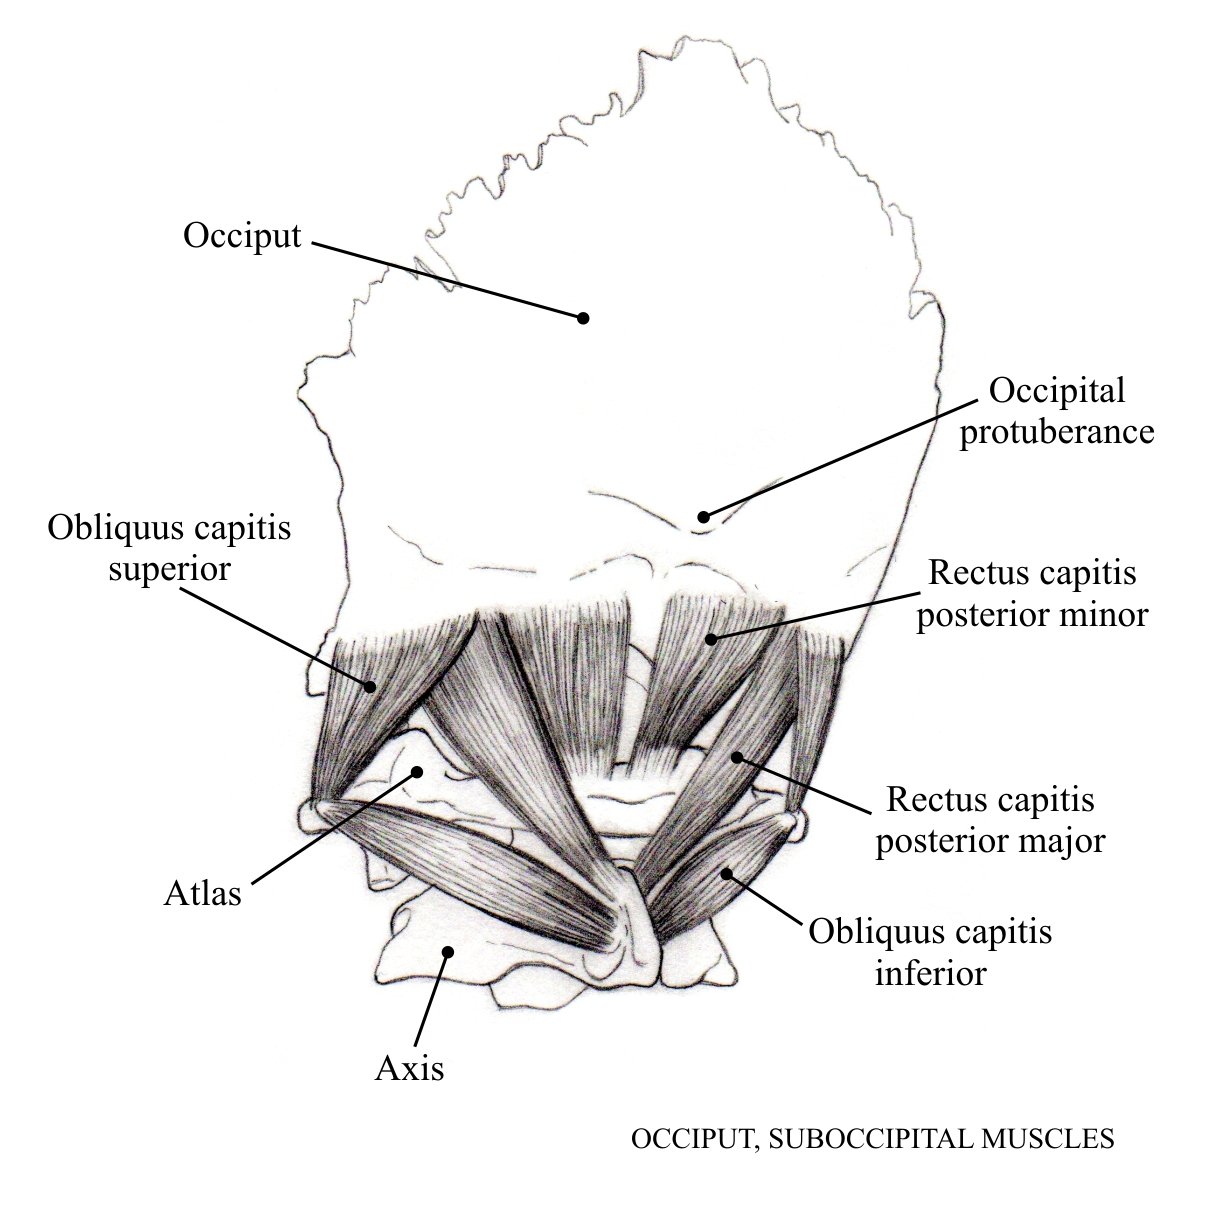 Suboccipital muscles Revised copy.jpeg